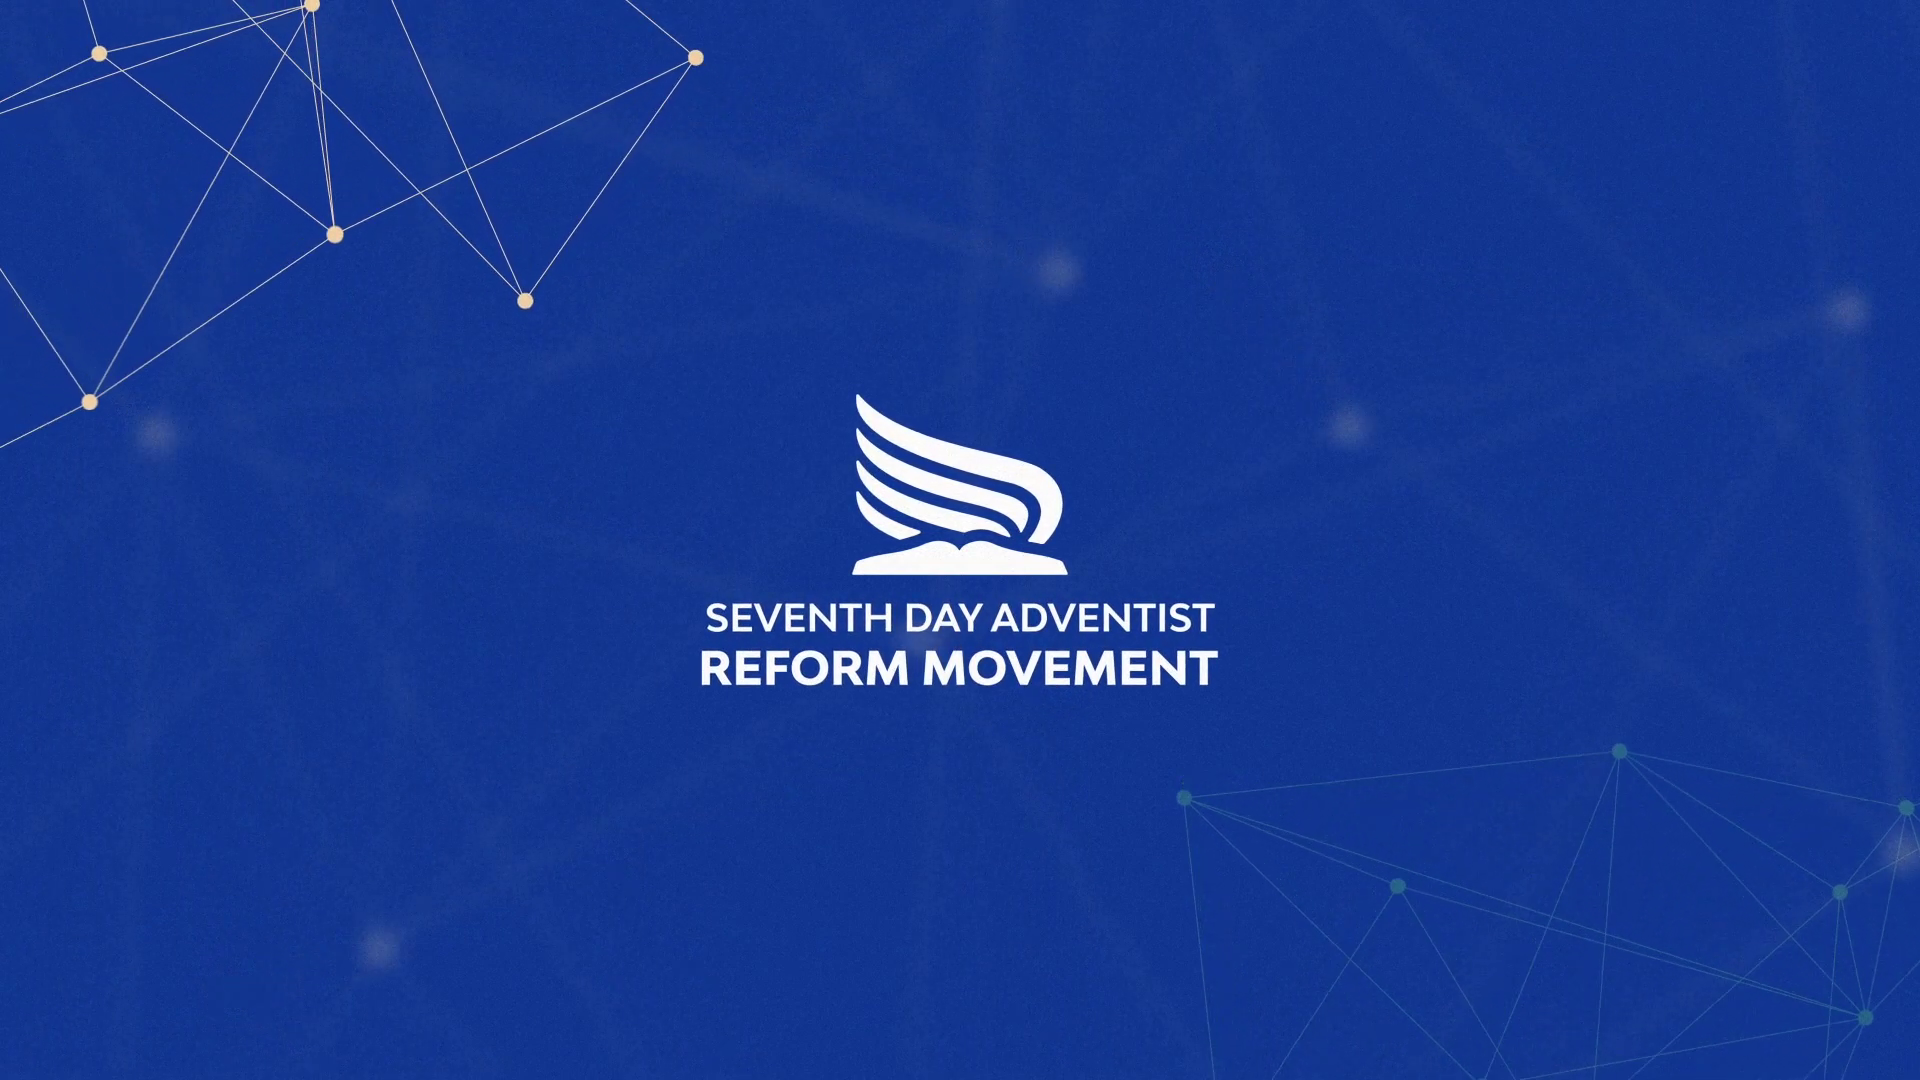 Seventh Day Adventist Reform Movement Institutional Video